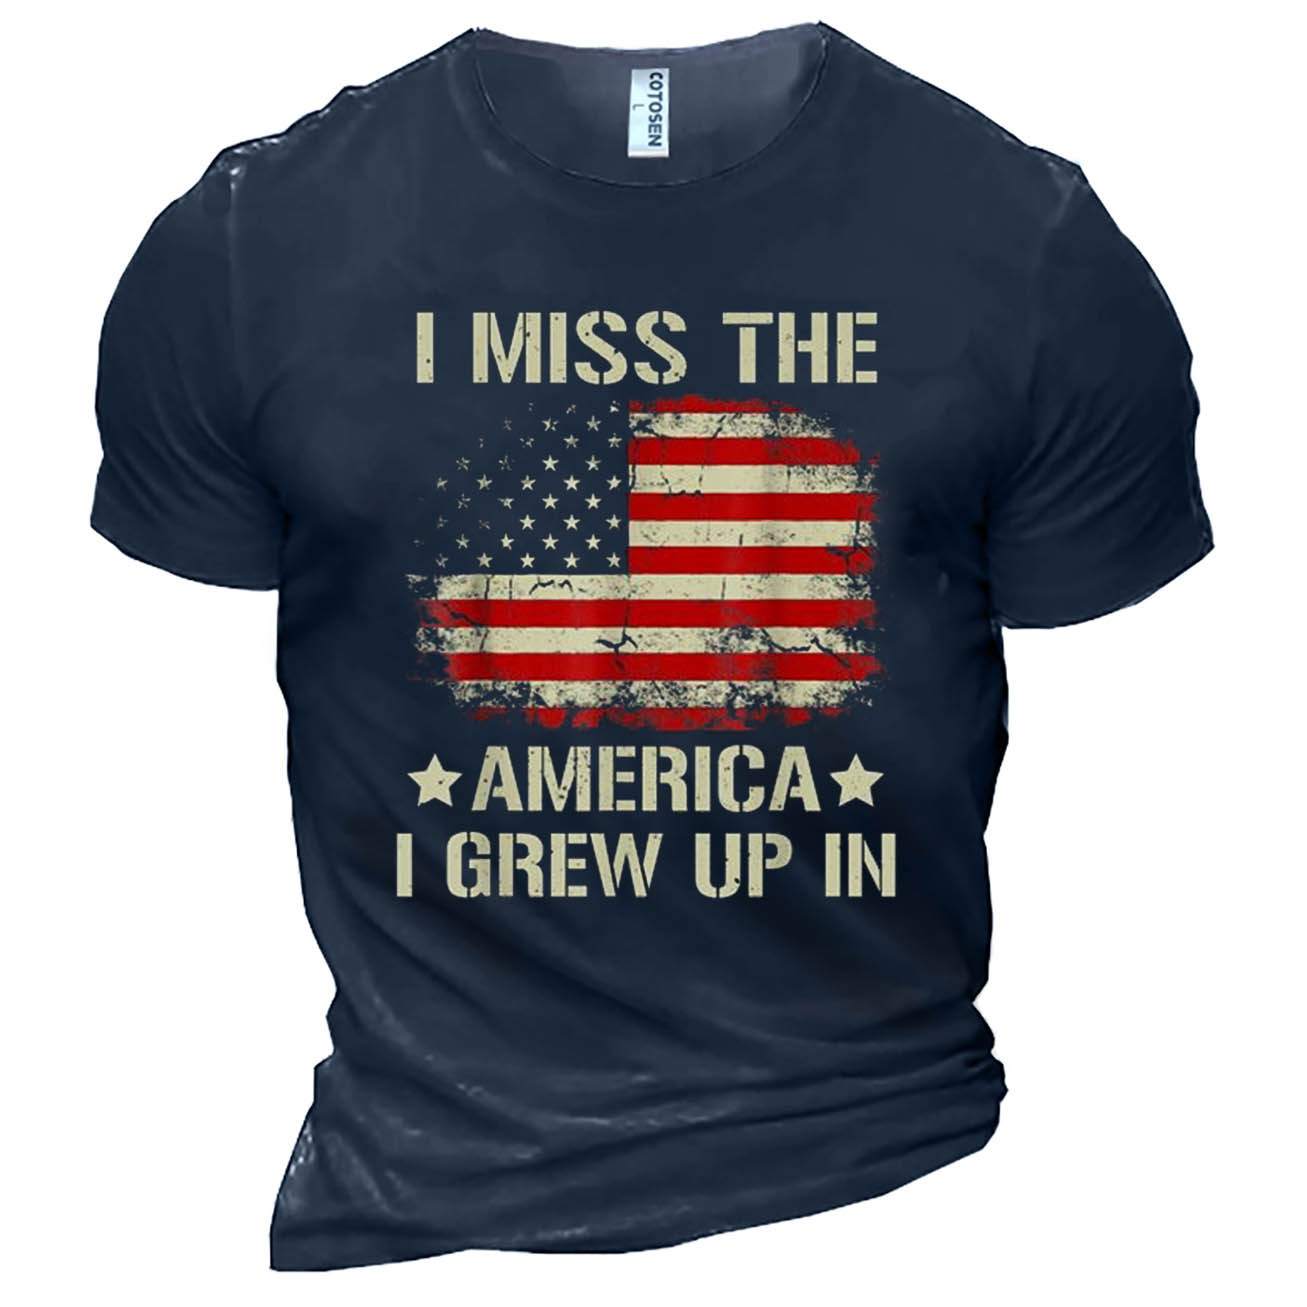 Men's Vintage I Miss Chic The America I Grew Up In American Flag Cotton T-shirt